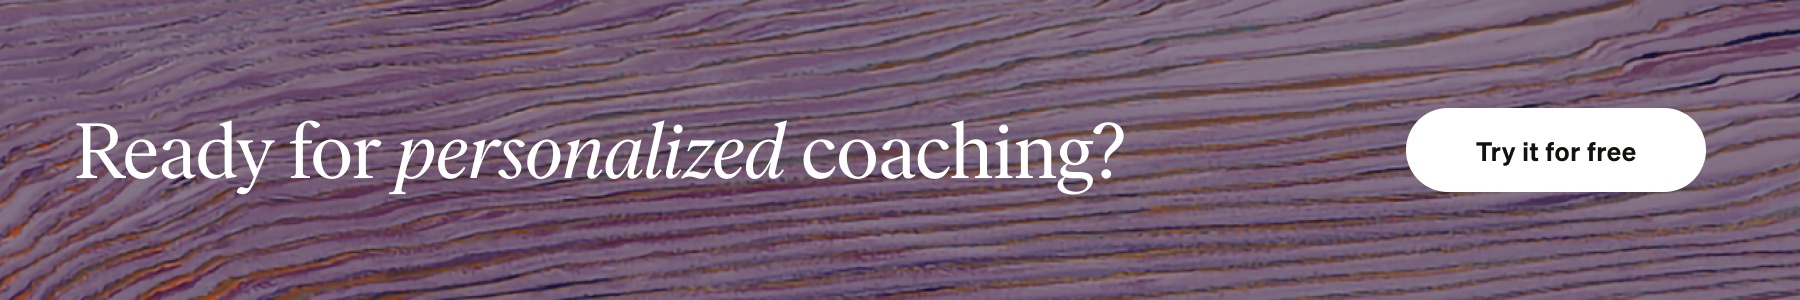 ready for personalized coaching - coaching for individuals